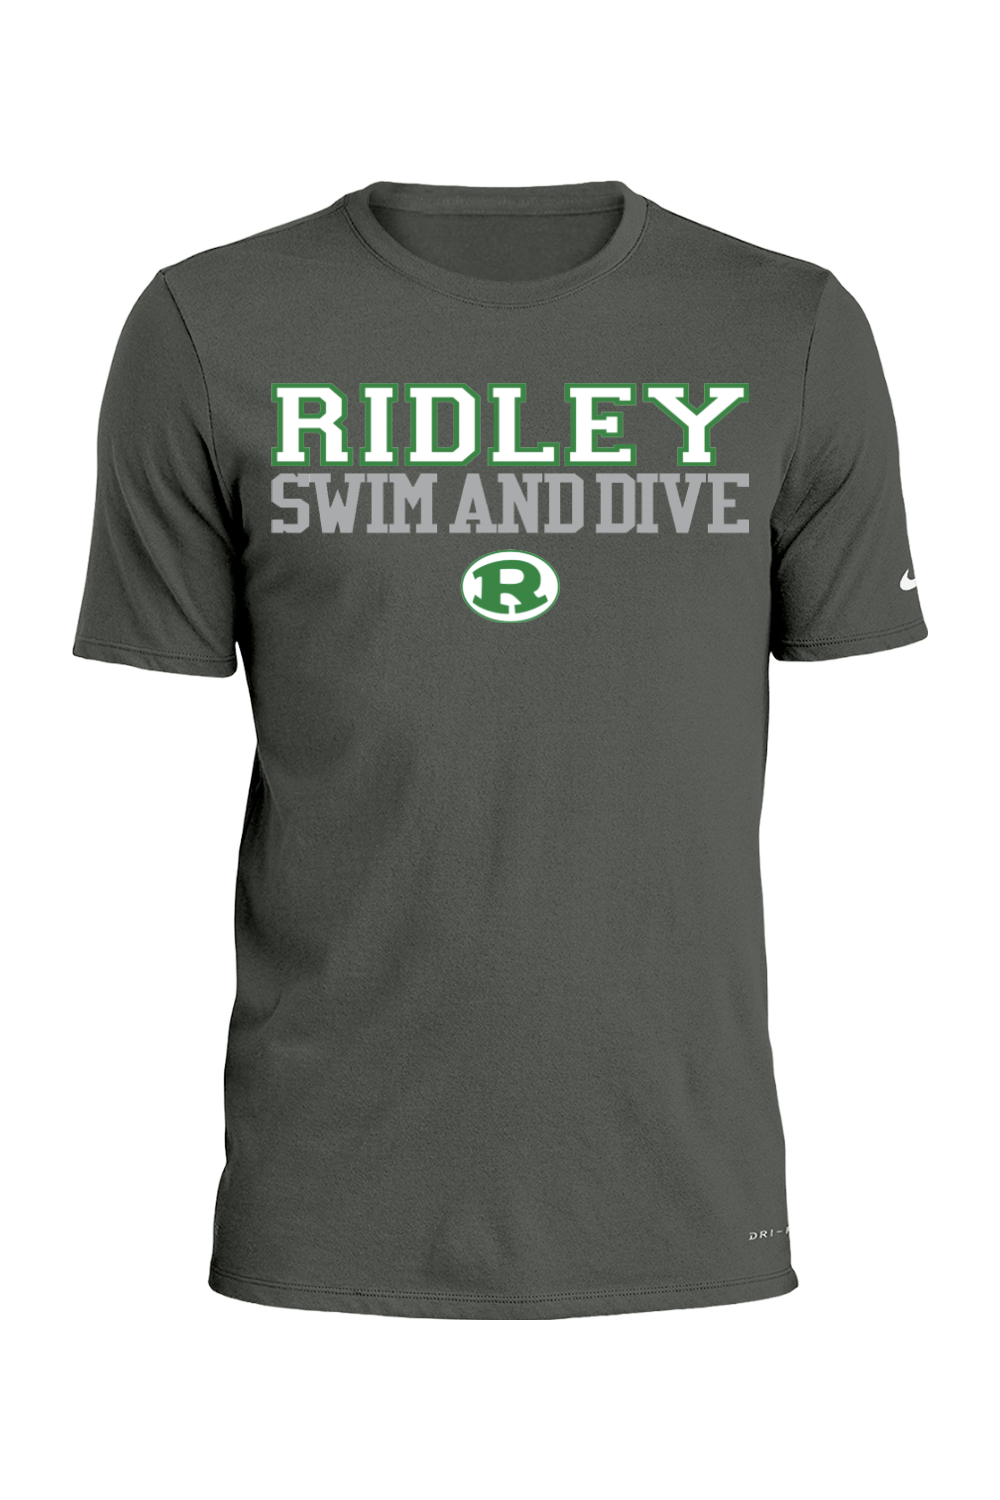 Ridley Swim and Dive Nike Dri-FIT Cotton/Poly Tee